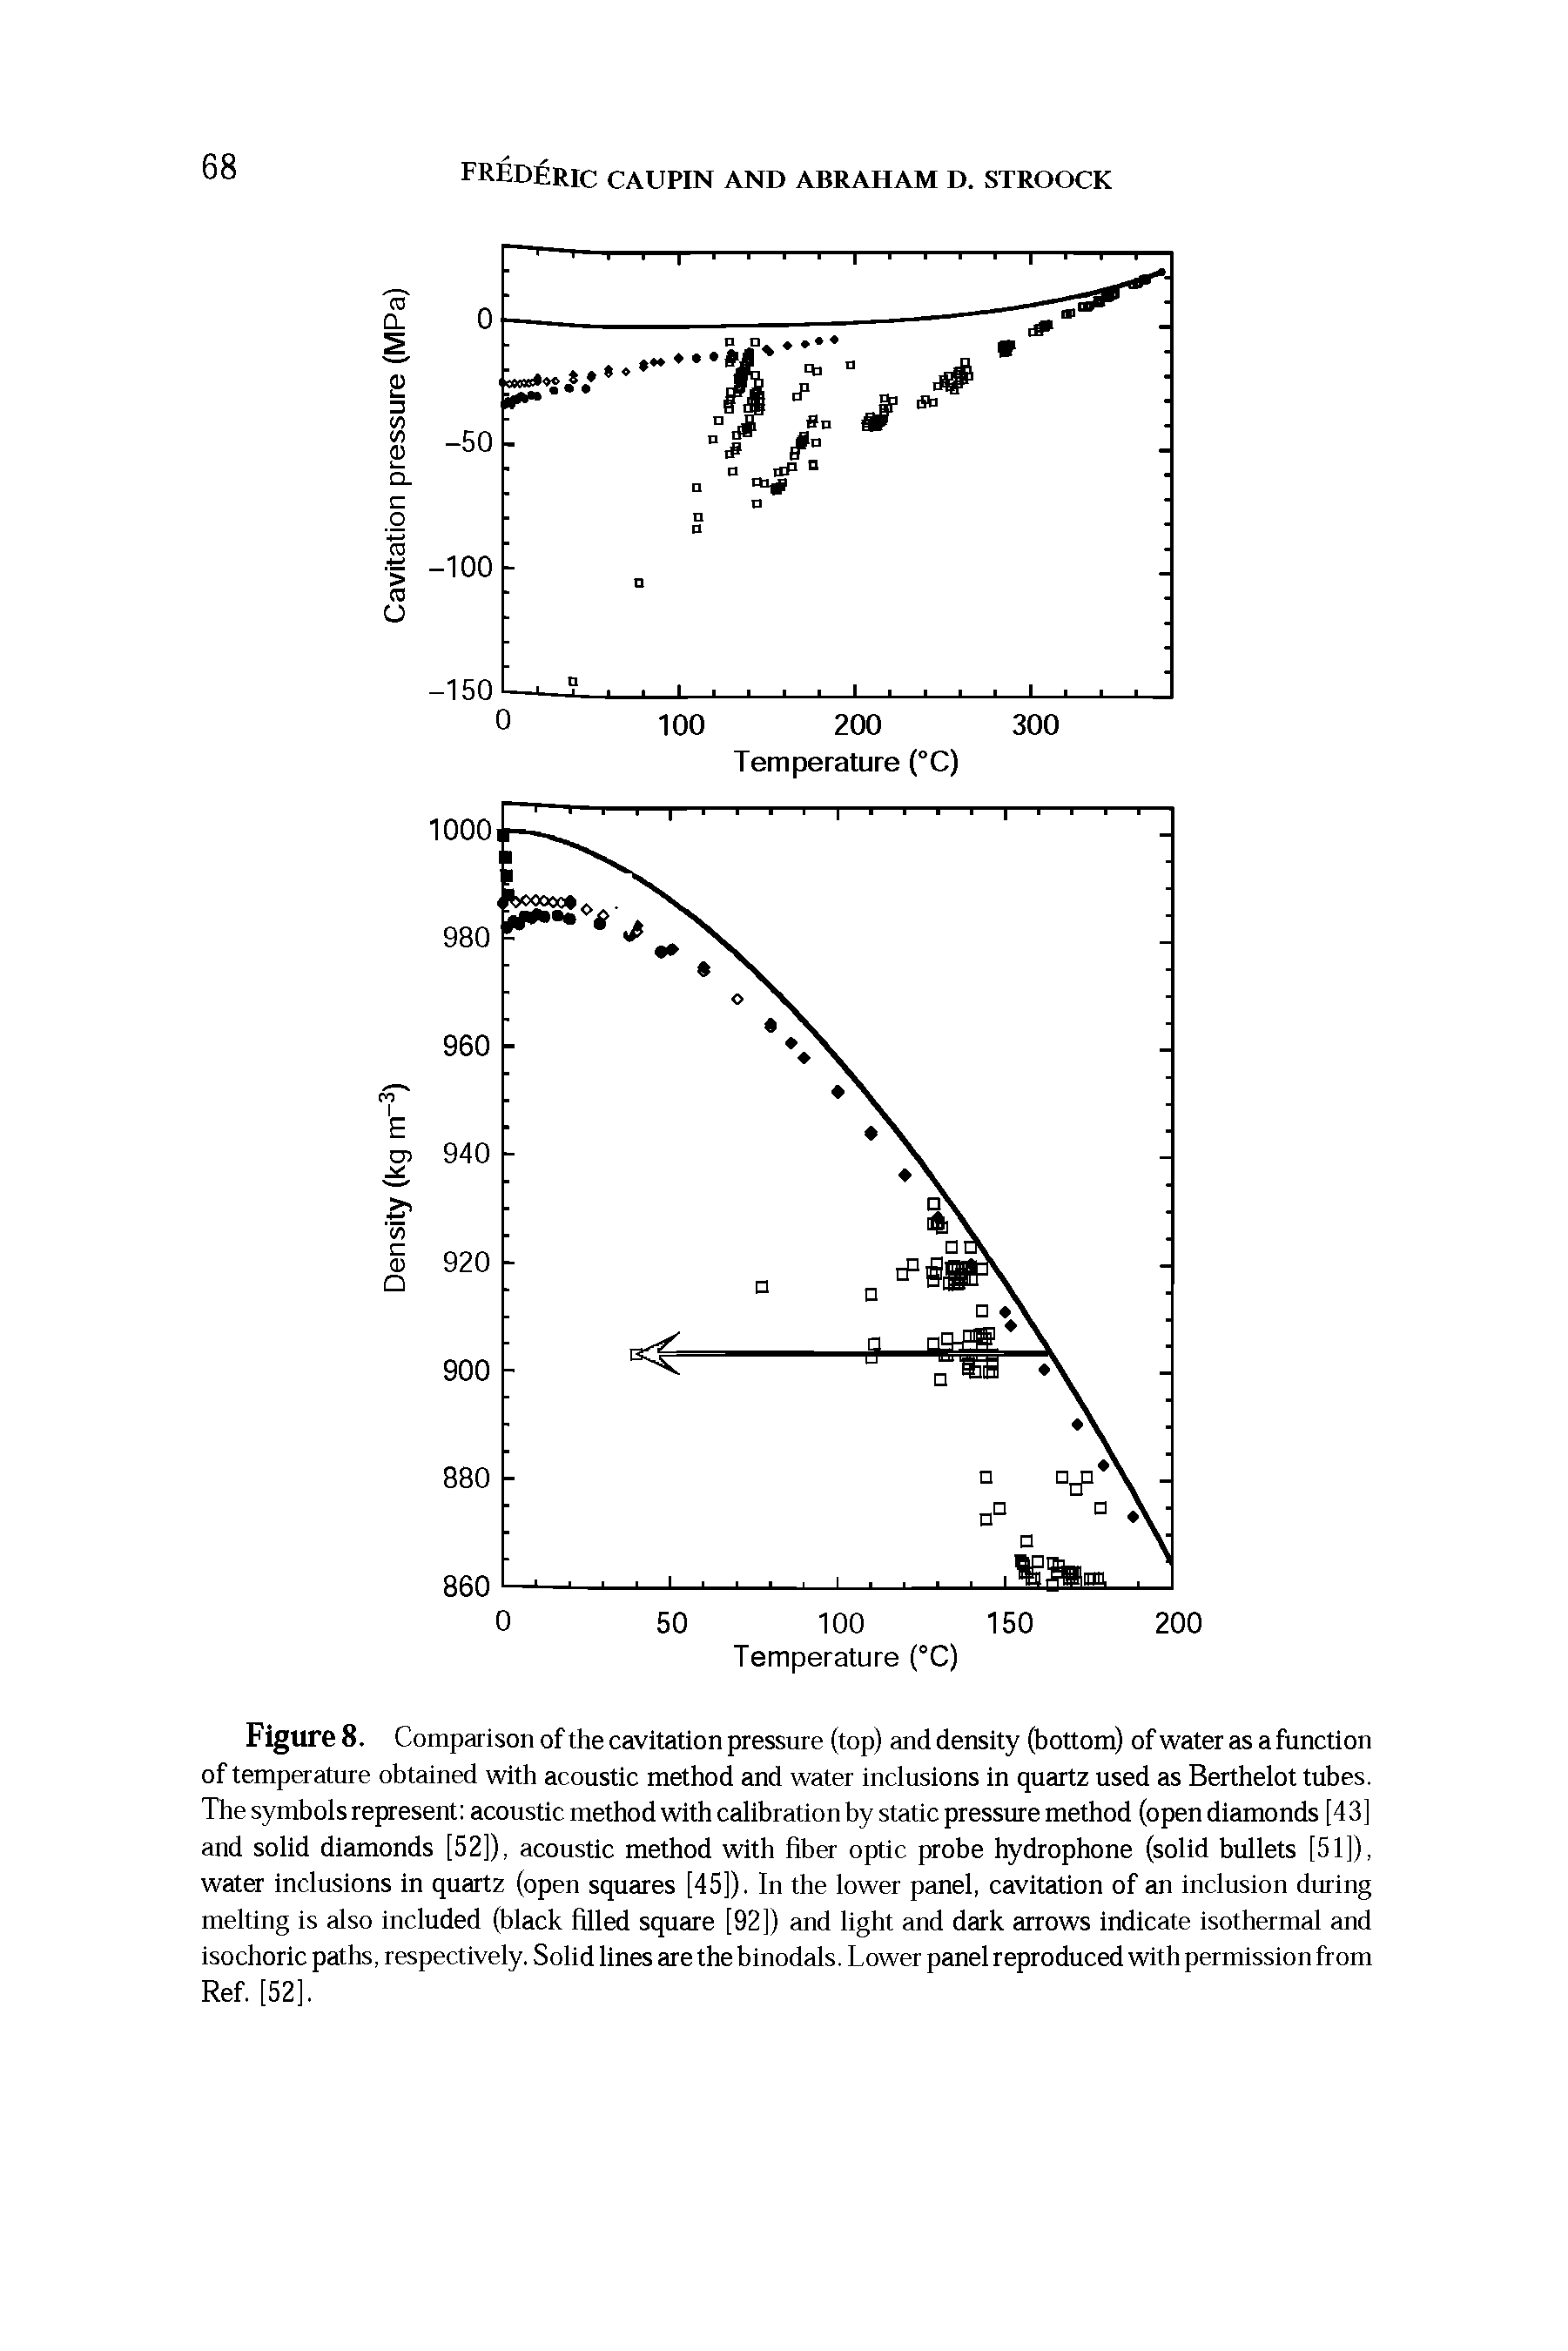 Figure 8. Comparison of the cavitation pressure (top) and density (bottom) of water as a function of temperature obtained with acoustic method and water inclusions in quartz used as Berthelot tubes. The symbols represent acoustic method with calibration by static pressure method (open diamonds [43] and solid diamonds [52]), acoustic method with fiber optic probe hydrophone (solid bullets [51]), water Inclusions In quartz (open squares [45]). In the lower panel, cavitation of an inclusion during melting is also included (black filled square [92]) and light and dark arrows indicate isothermal and isochorlc paths, respectively. Solid lines are the binodals. Lower panel reproduced with permission from Ref. [52].